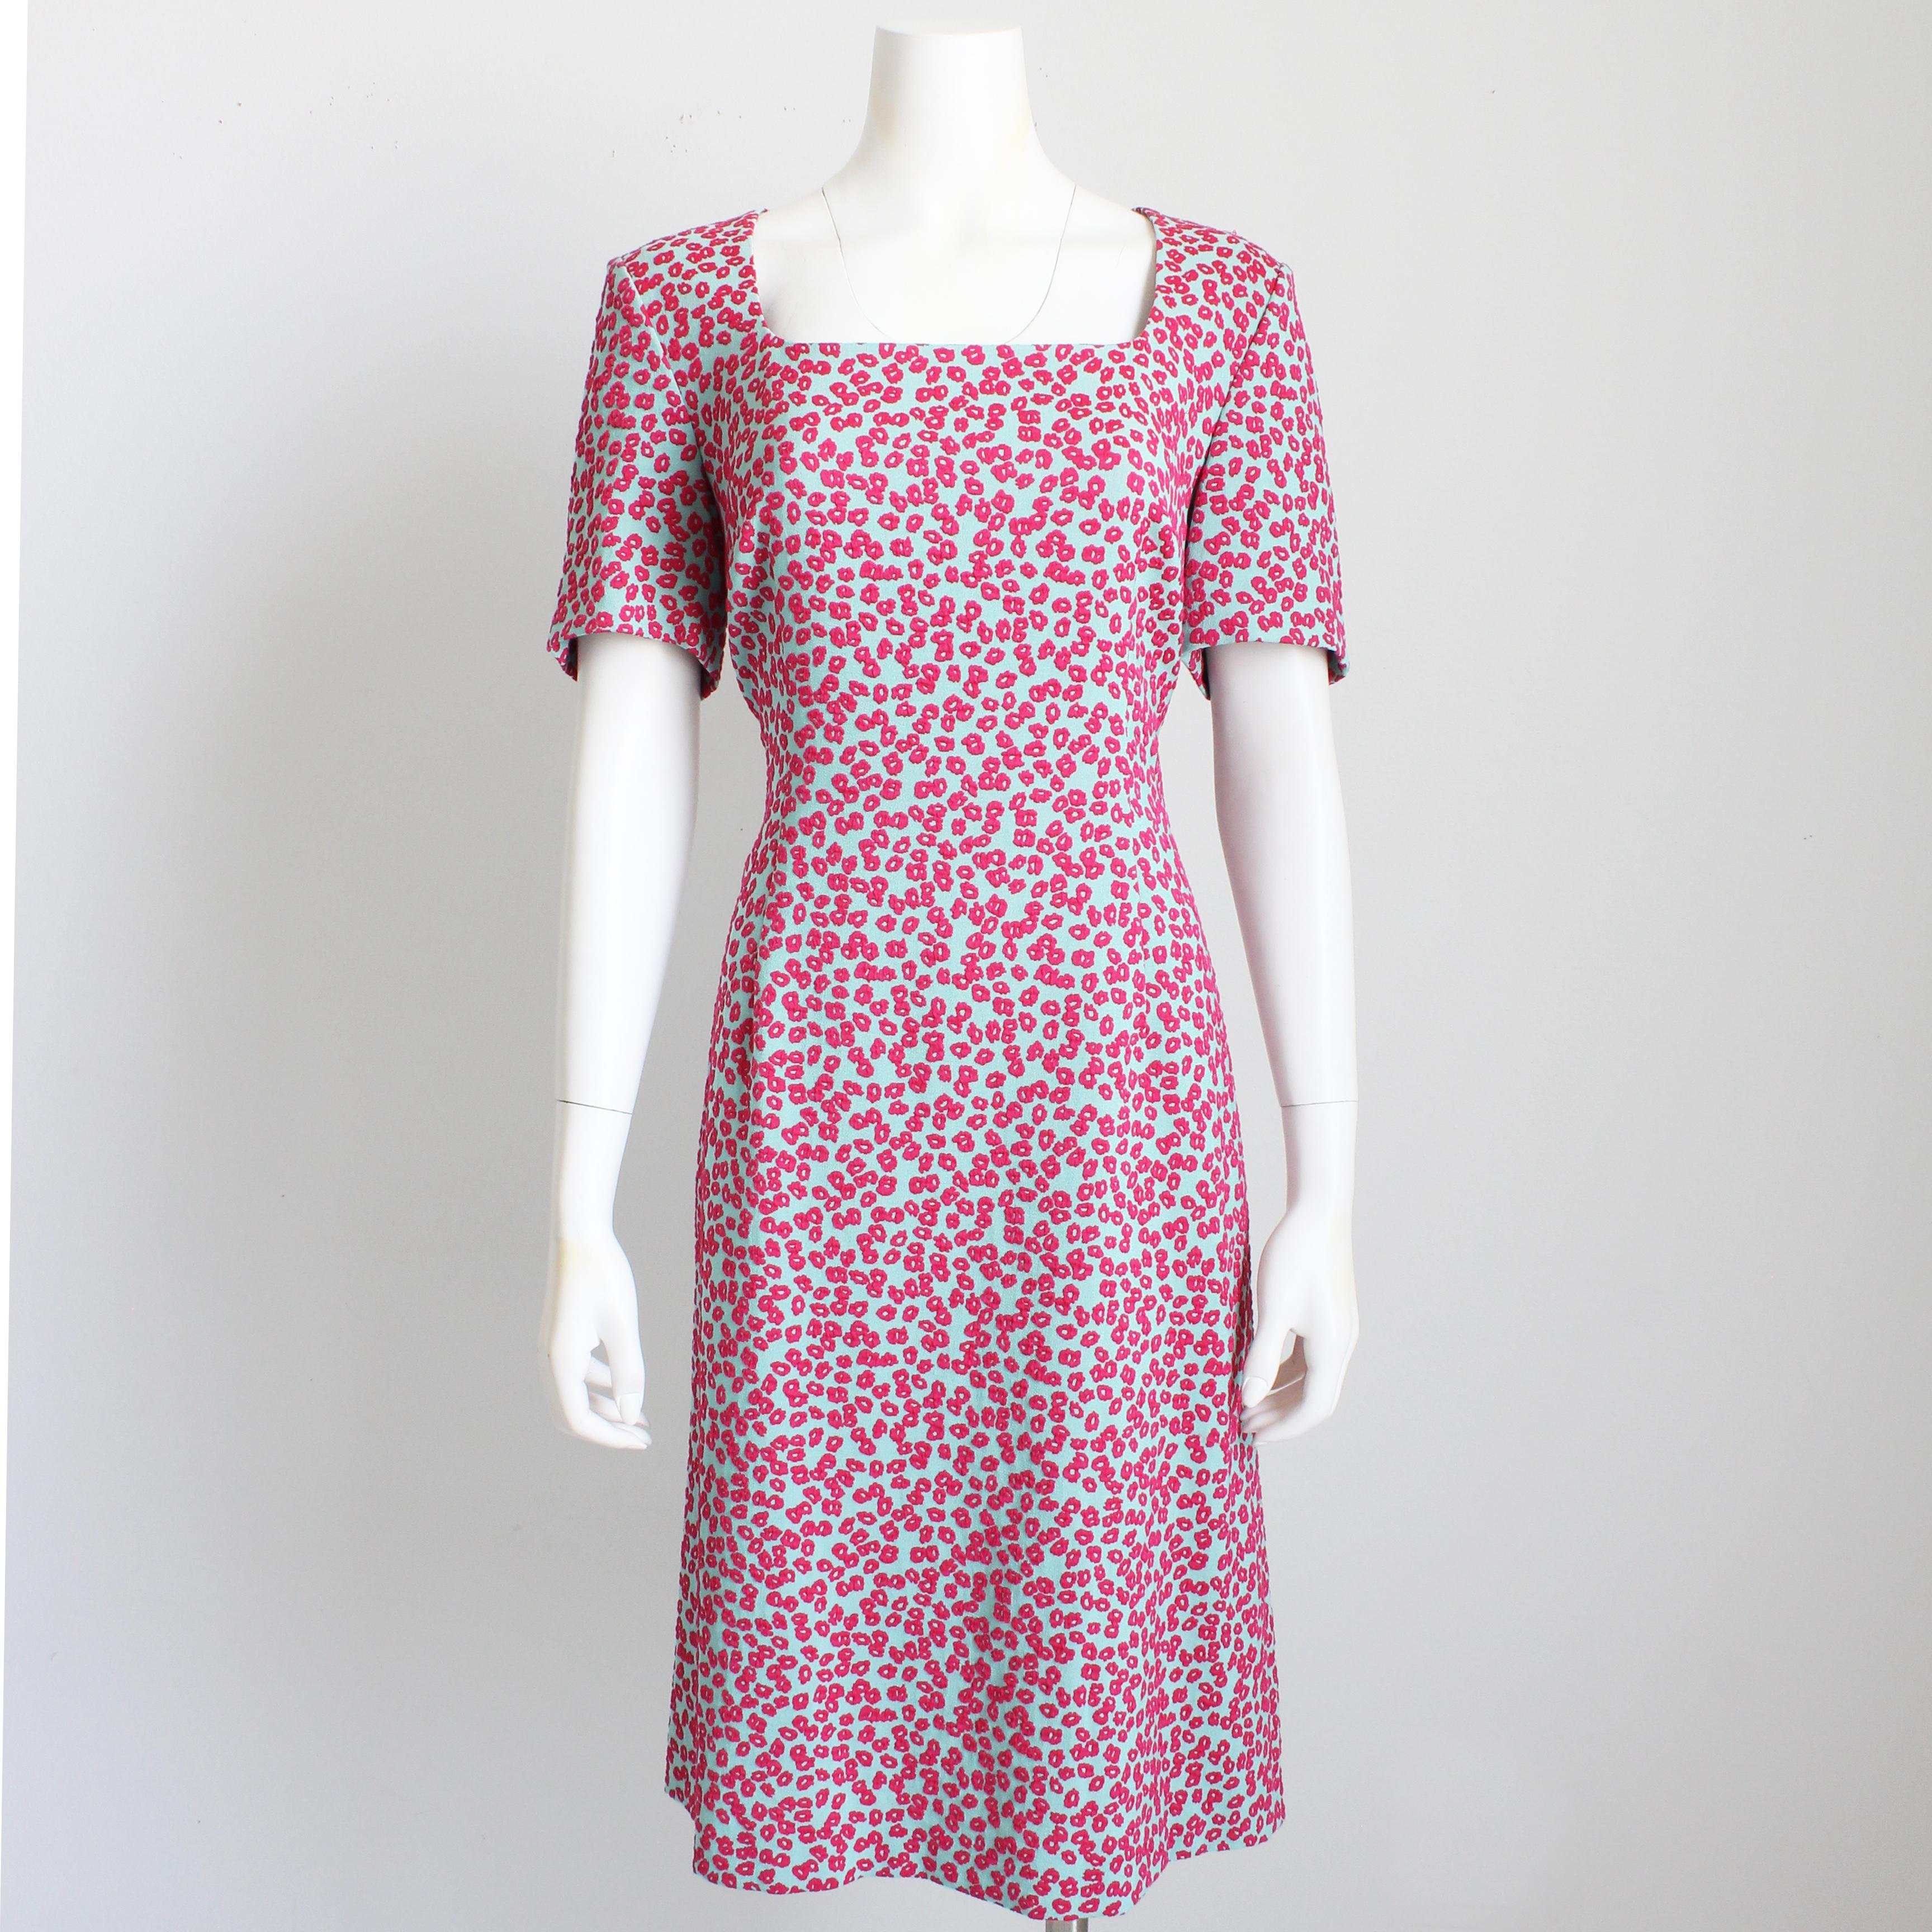 Preowned, authentic Escada mini daisy jacquard dress, from their 2018 collection (and retailed for $1450!). Made from a cotton/viscose/polyamide fabric in pale green, it features a pink 